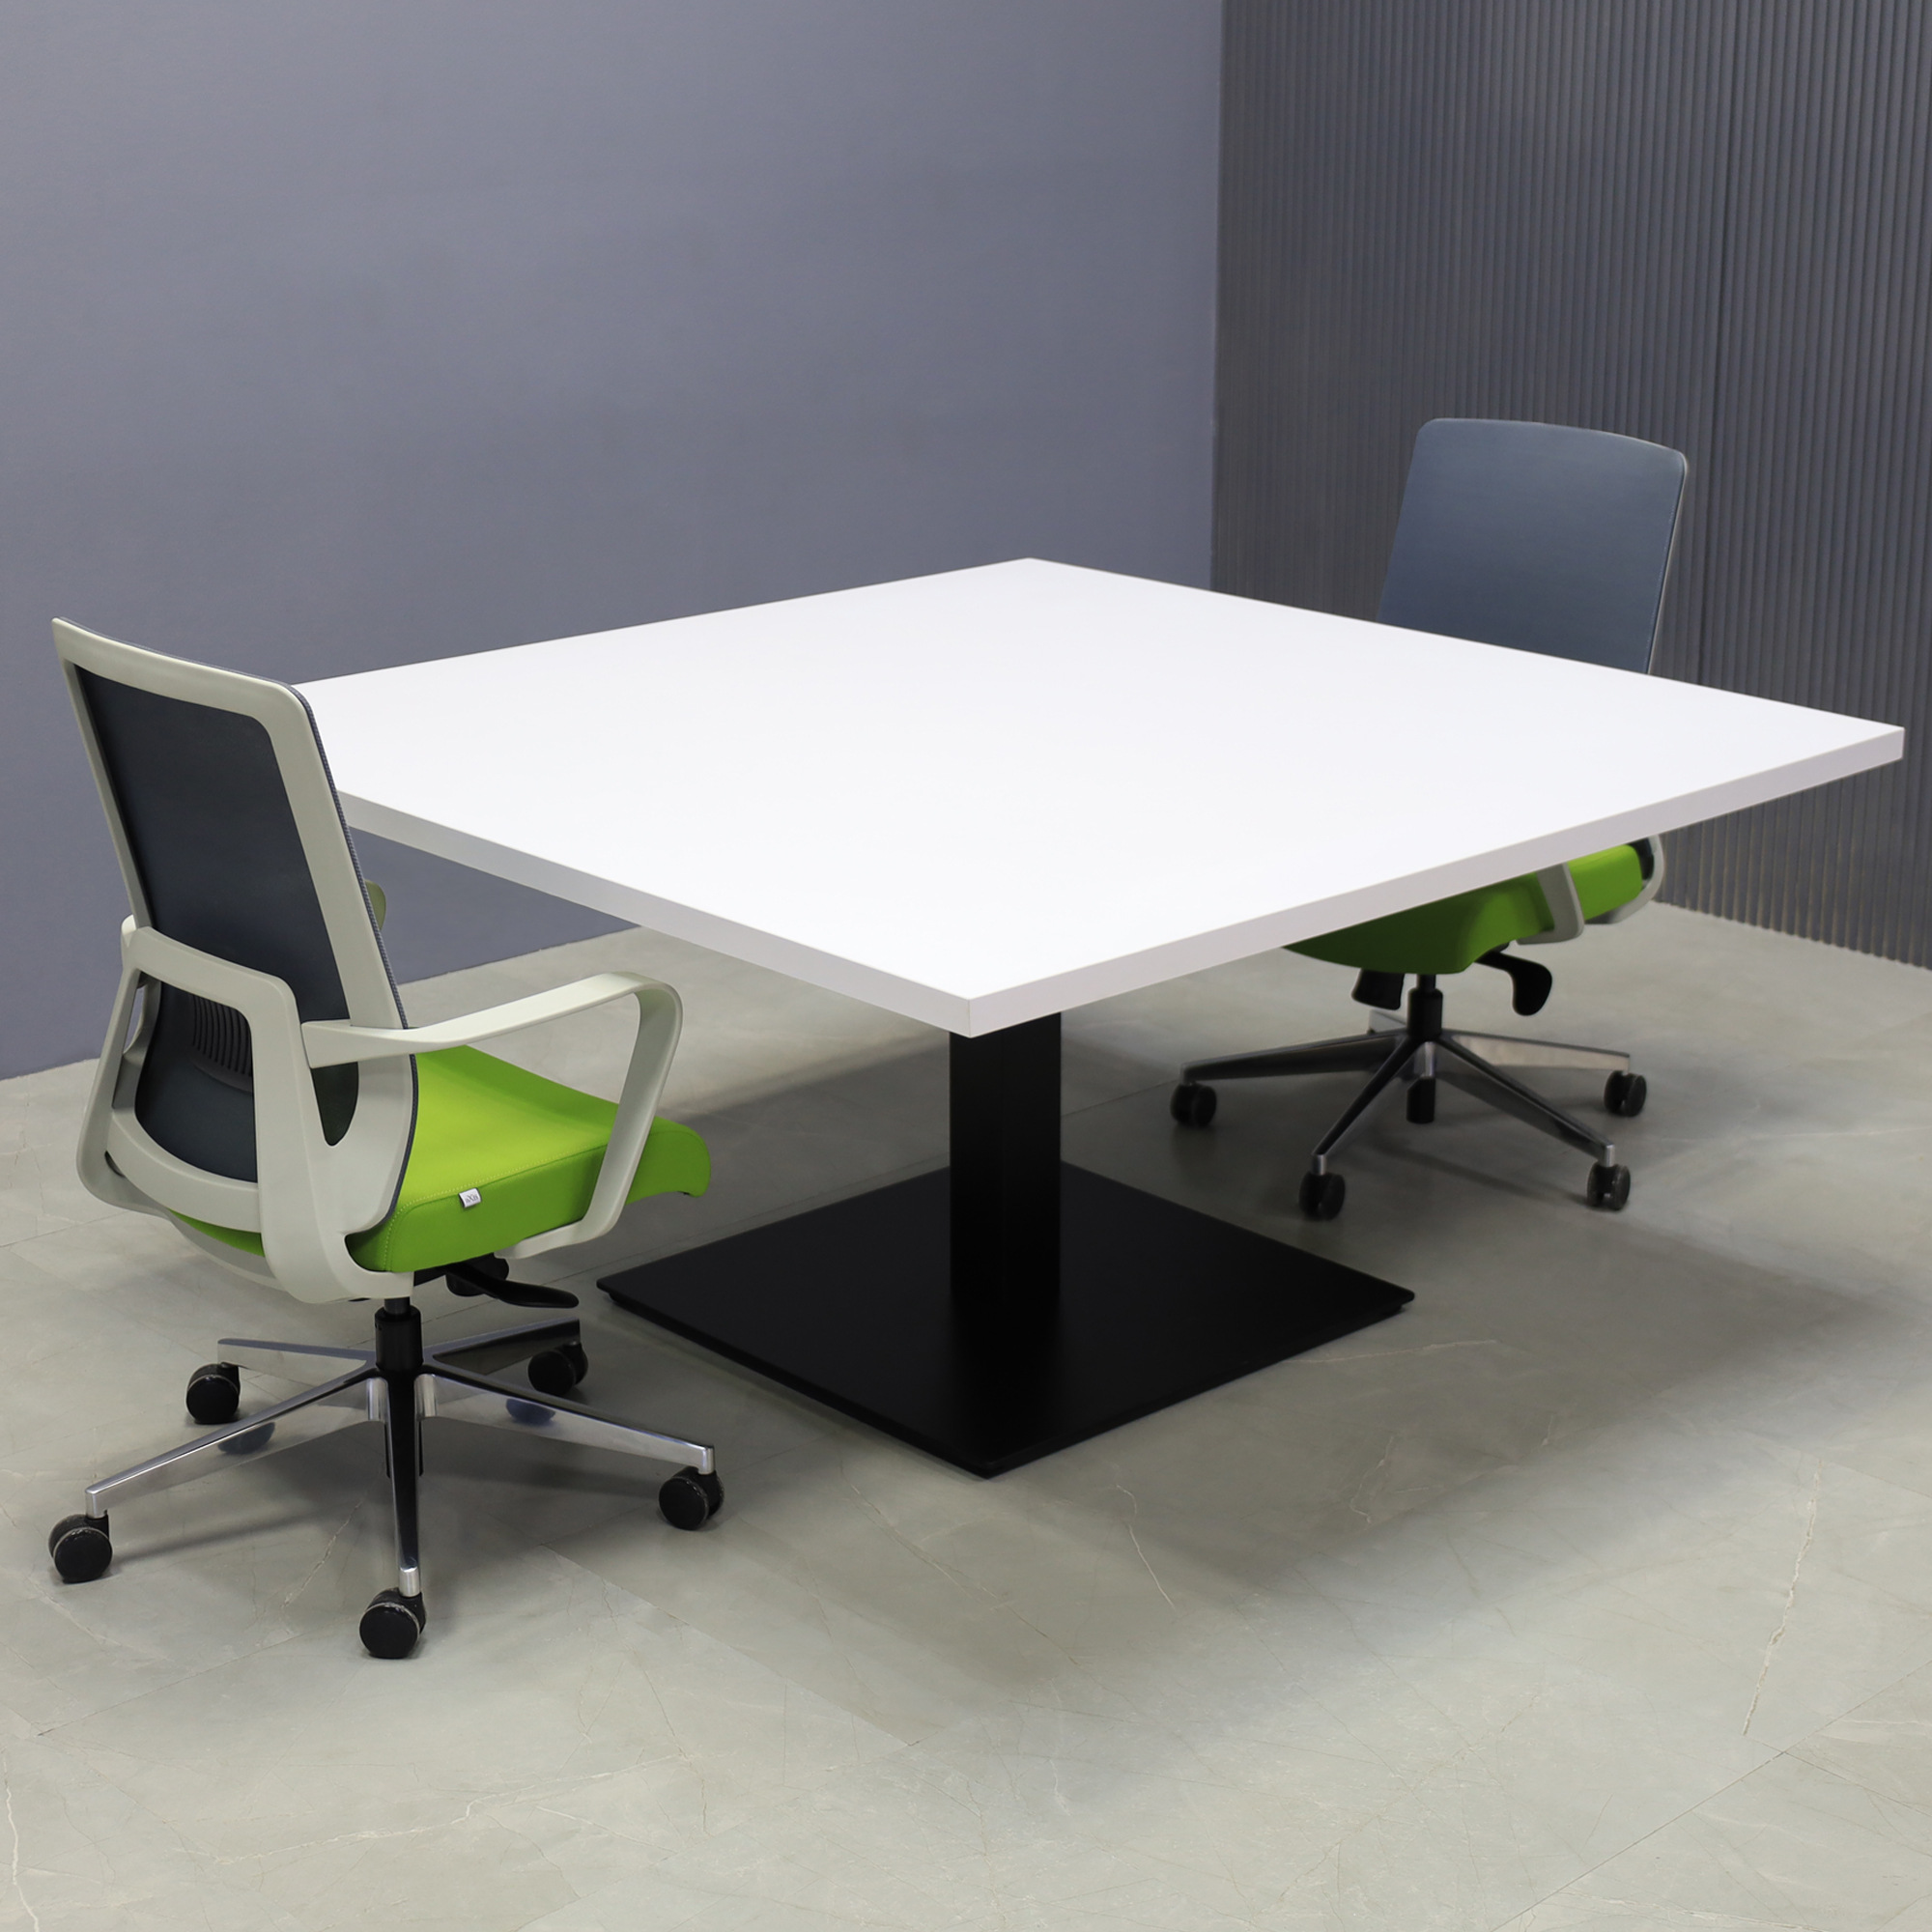 60-inch California Square Conference Table with Laminate Top in white matte and black stainless steel base, shown here.